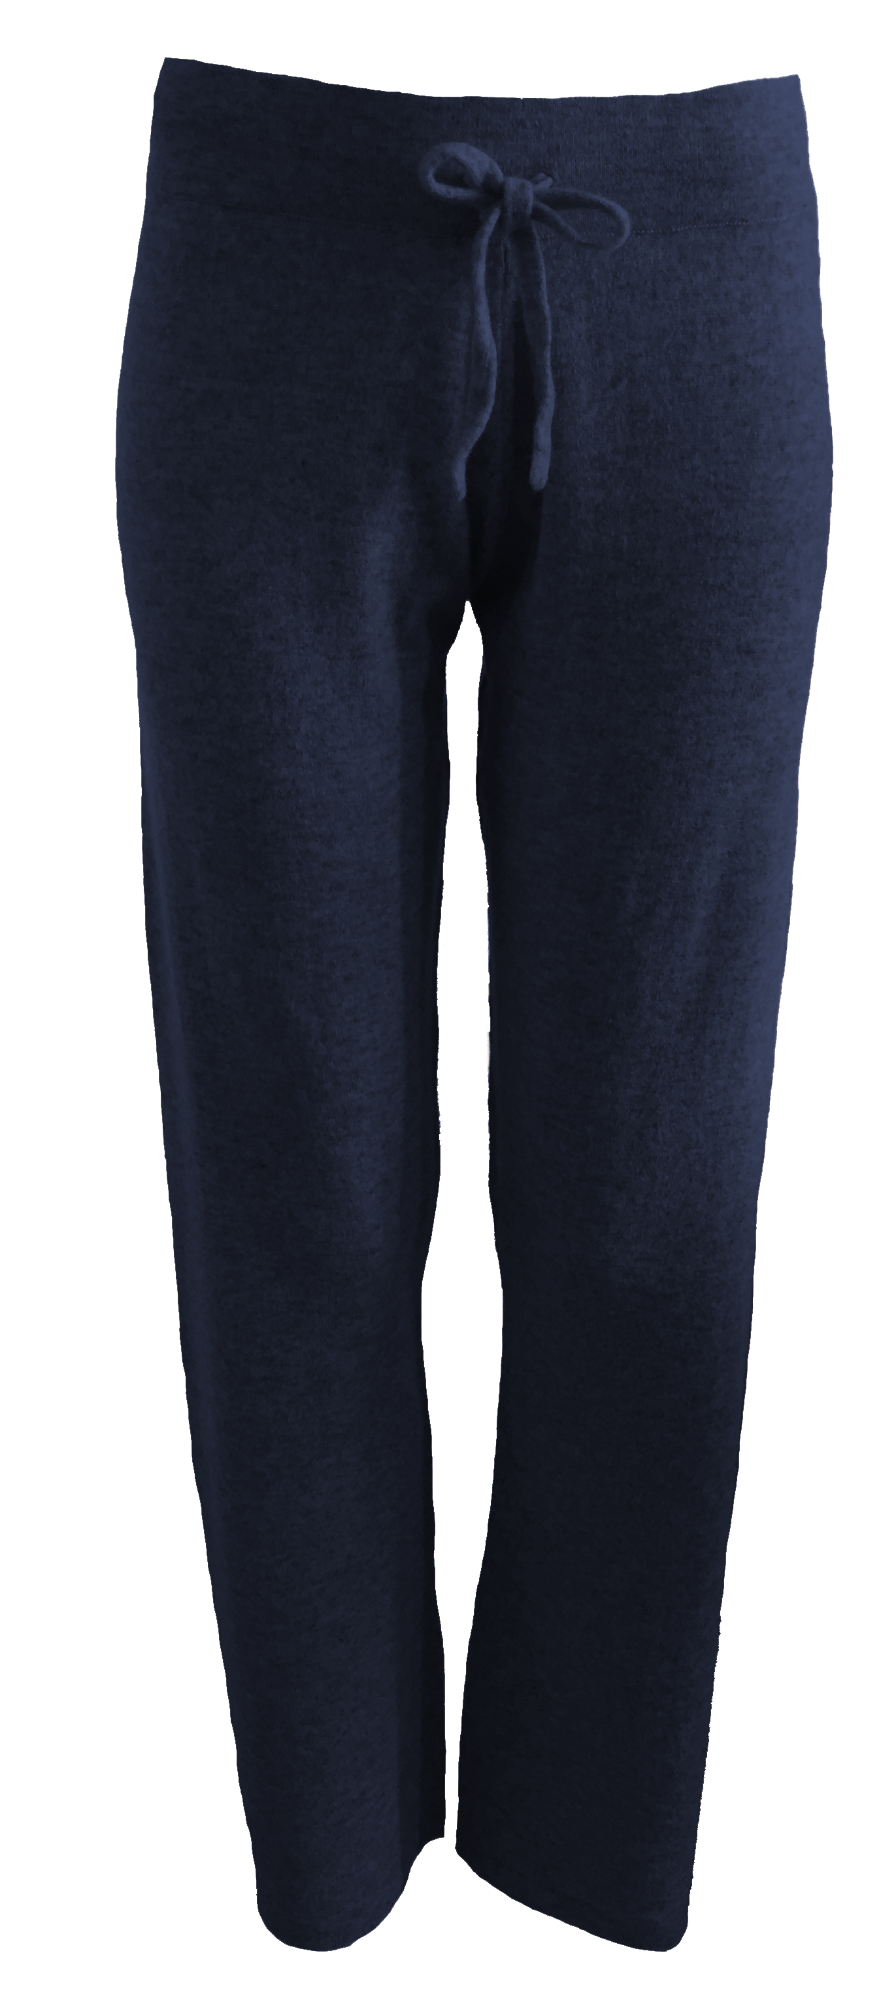 Cashmere lounge pant navy